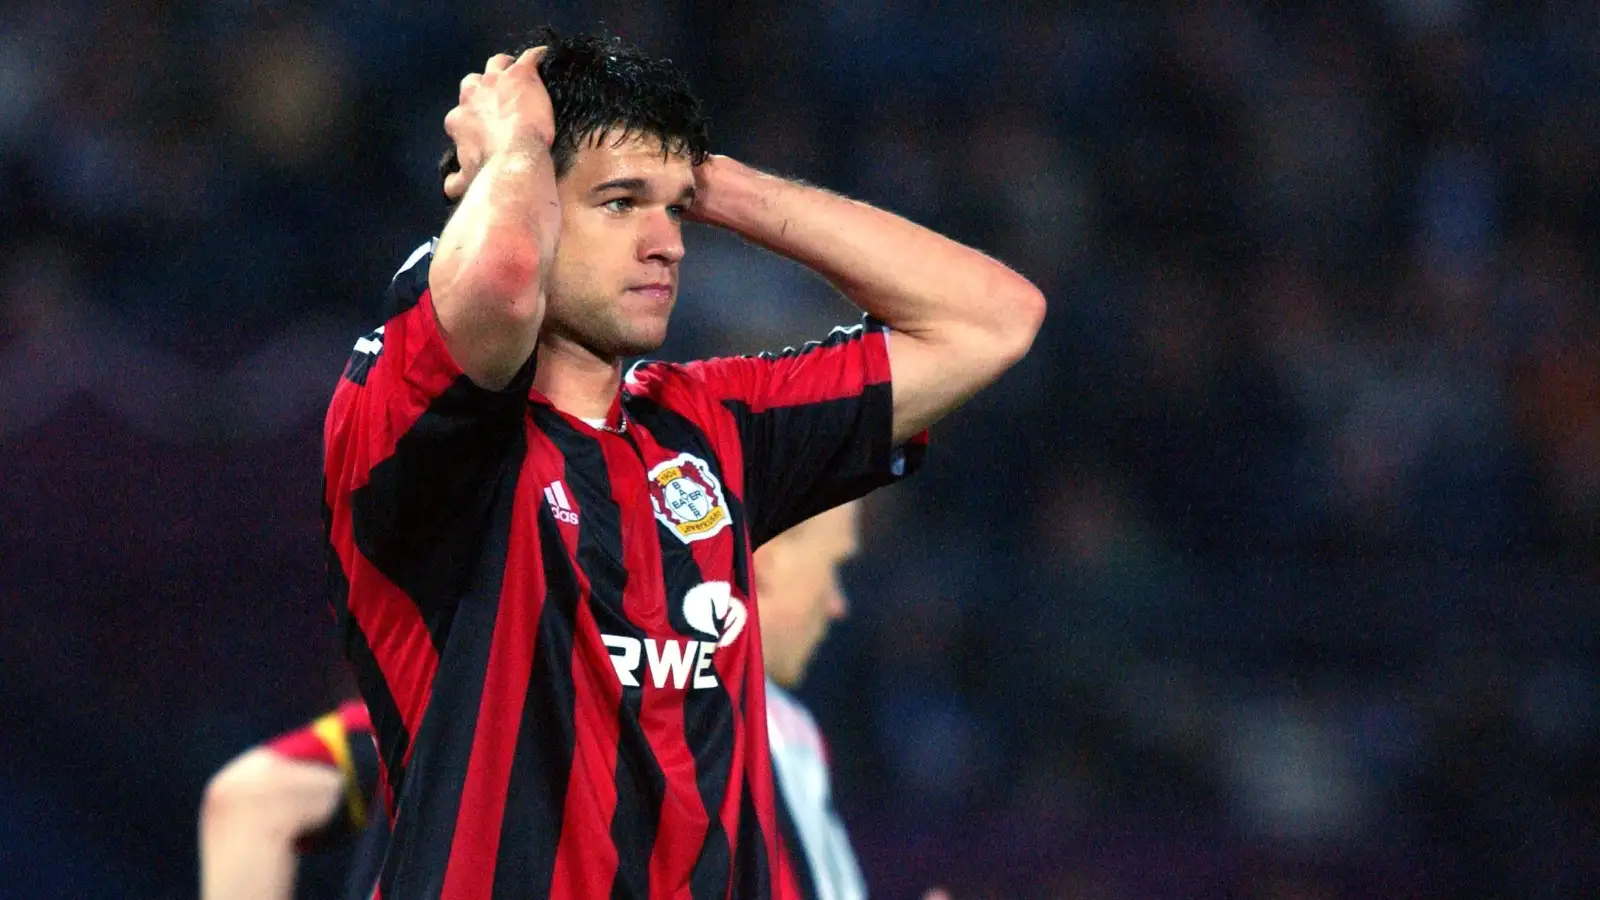 Remembering Bayer Leverkusen's incredible run of near misses in the early 2000s